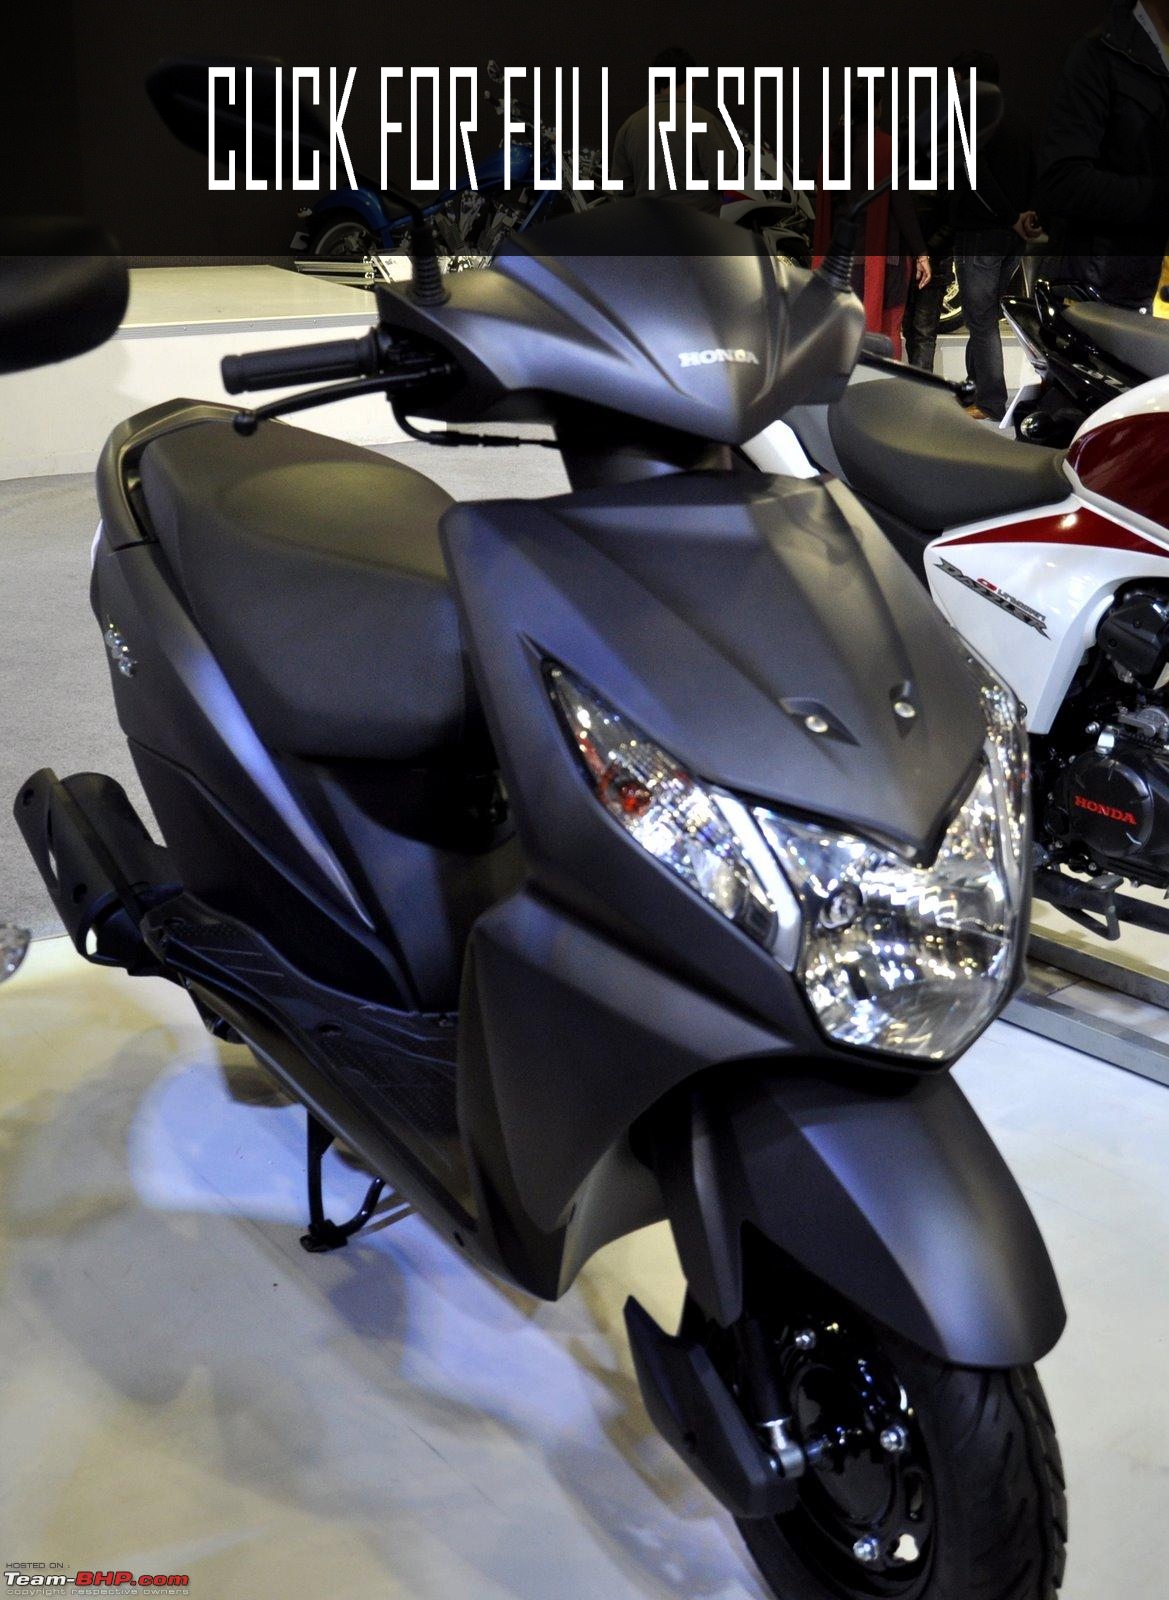 Honda Dio 2014 Model Reviews Prices Ratings With Various Photos